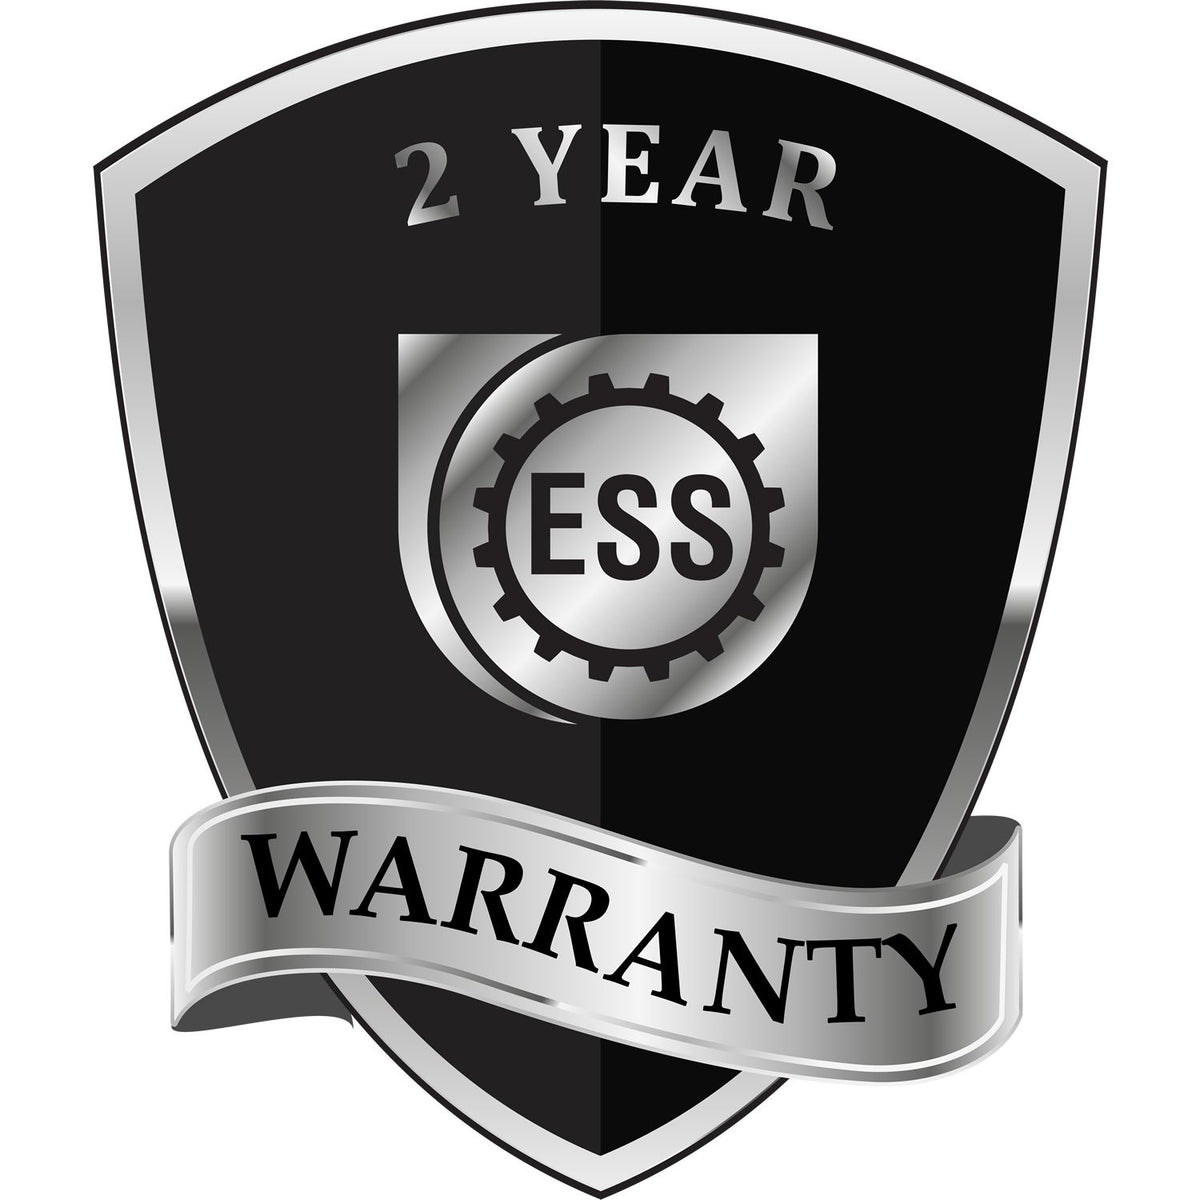 A black and silver badge or emblem showing warranty information for the Texas Geologist Desk Seal